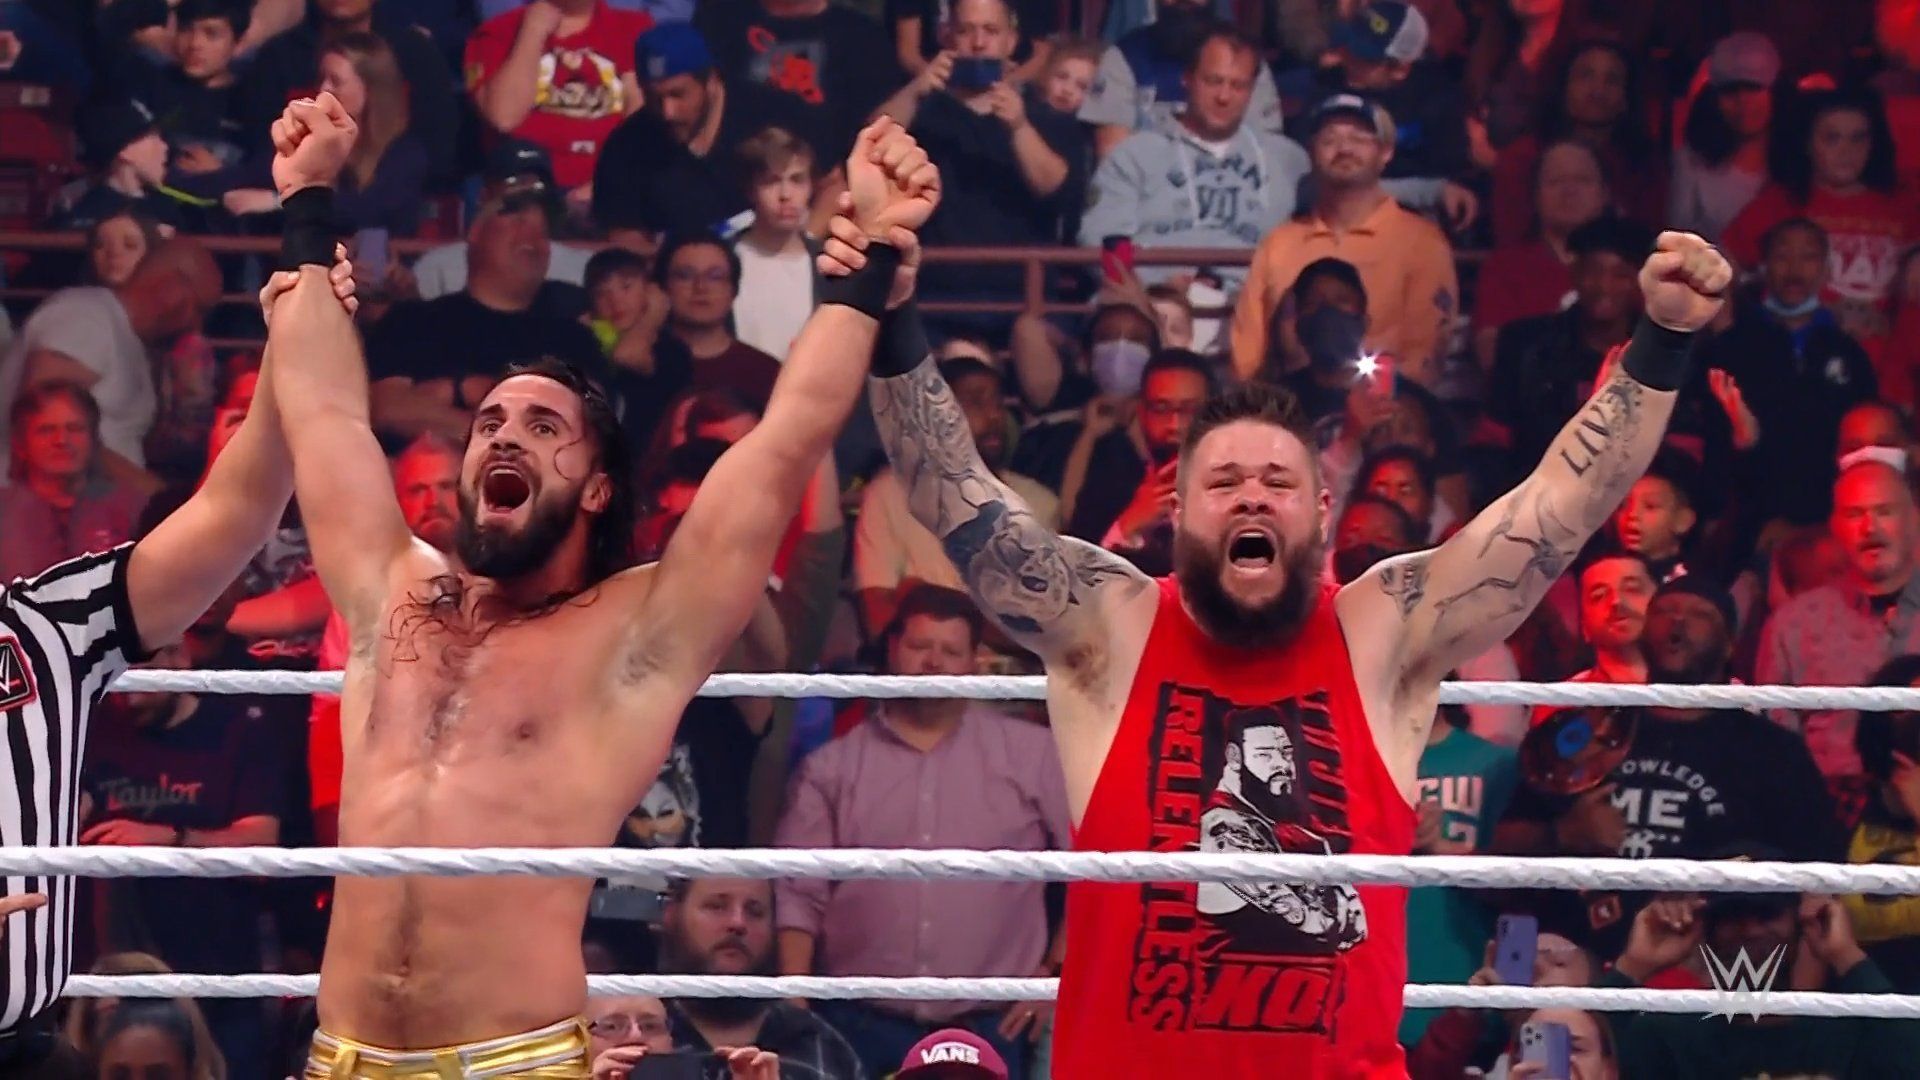 Seth Rollins and Kevin Owens have been tag team partners